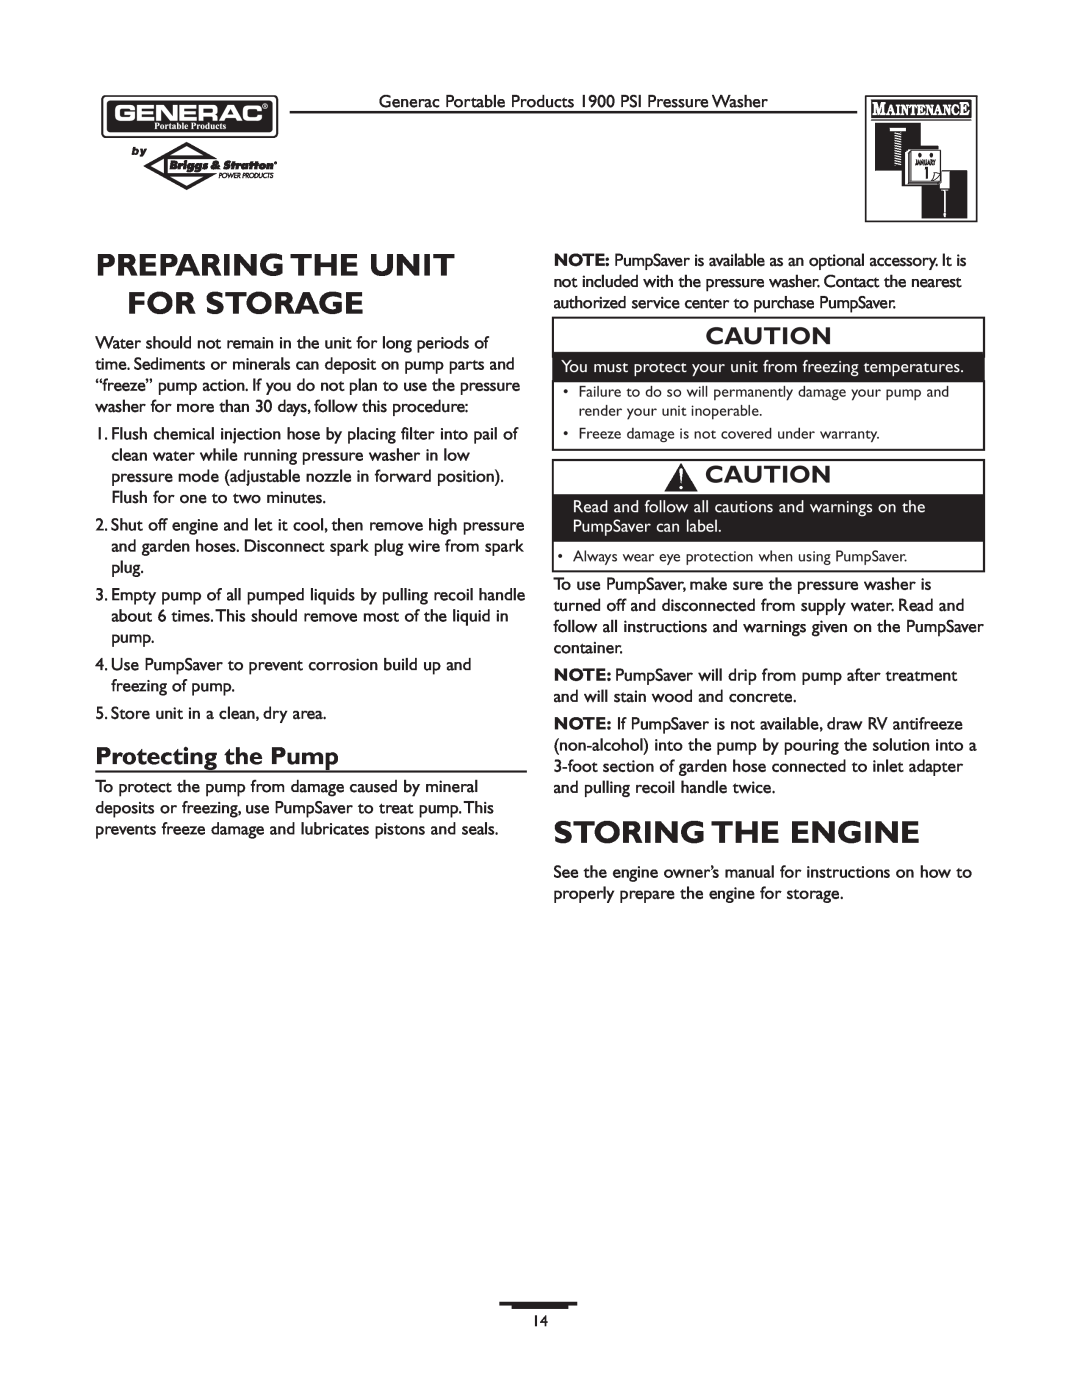 Briggs & Stratton 1900PSI owner manual Preparing The Unit For Storage, Storing The Engine, Protecting the Pump 